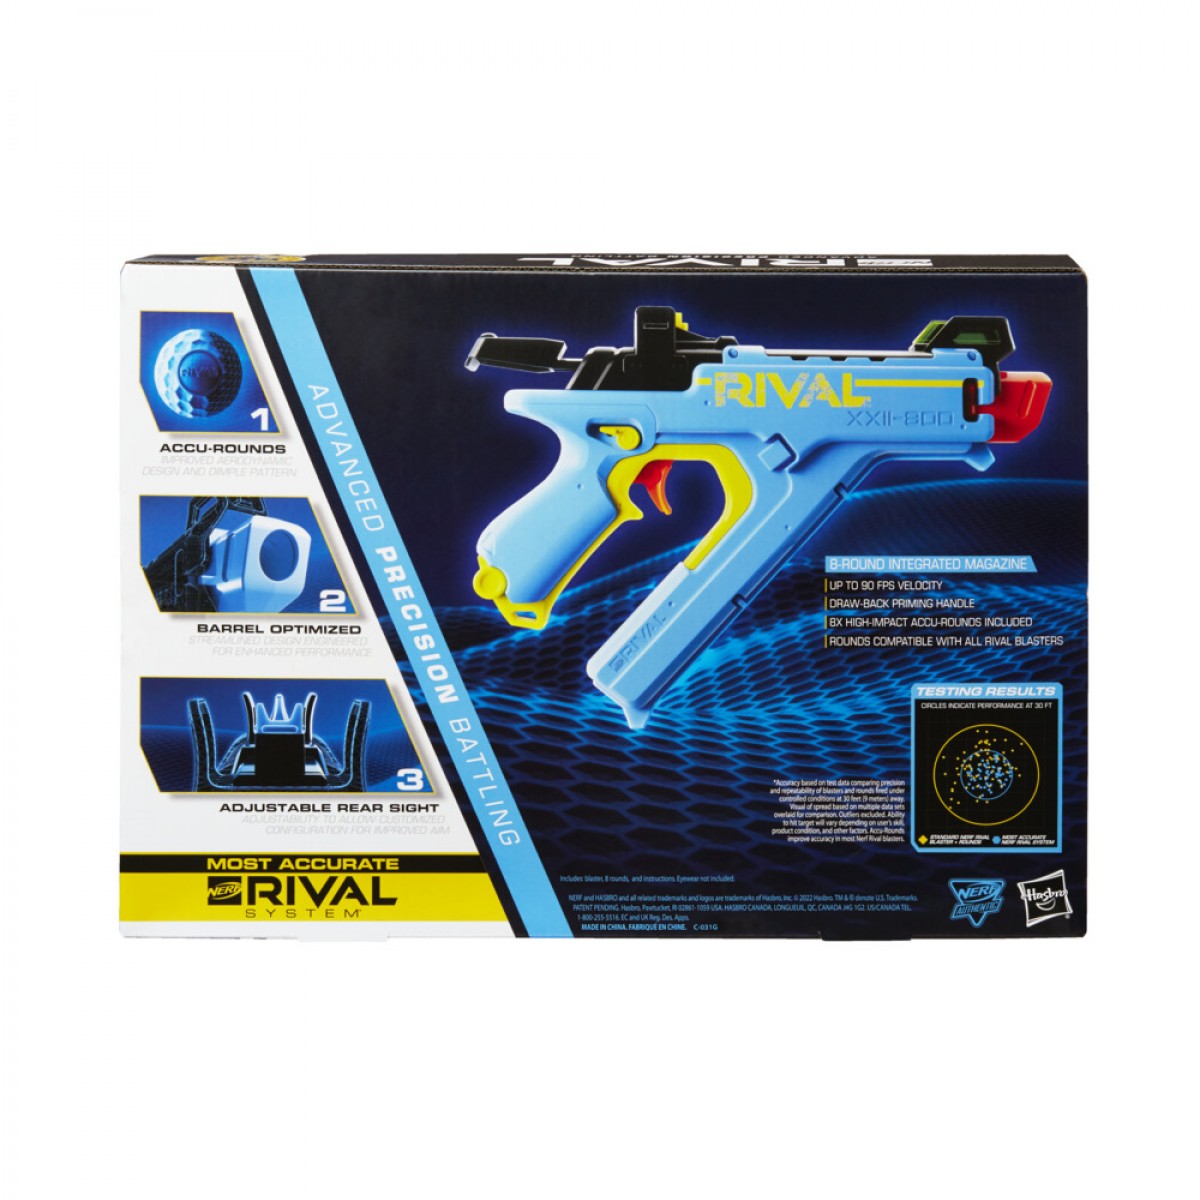 Nerf Rival Vision Xxii-800 Blaster, Most Accurate Nerf Rival System, Adjustable Sight, Integrated Magazine, 8 Nerf Rival Accu-Rounds, 14Yrs+, Multicolour